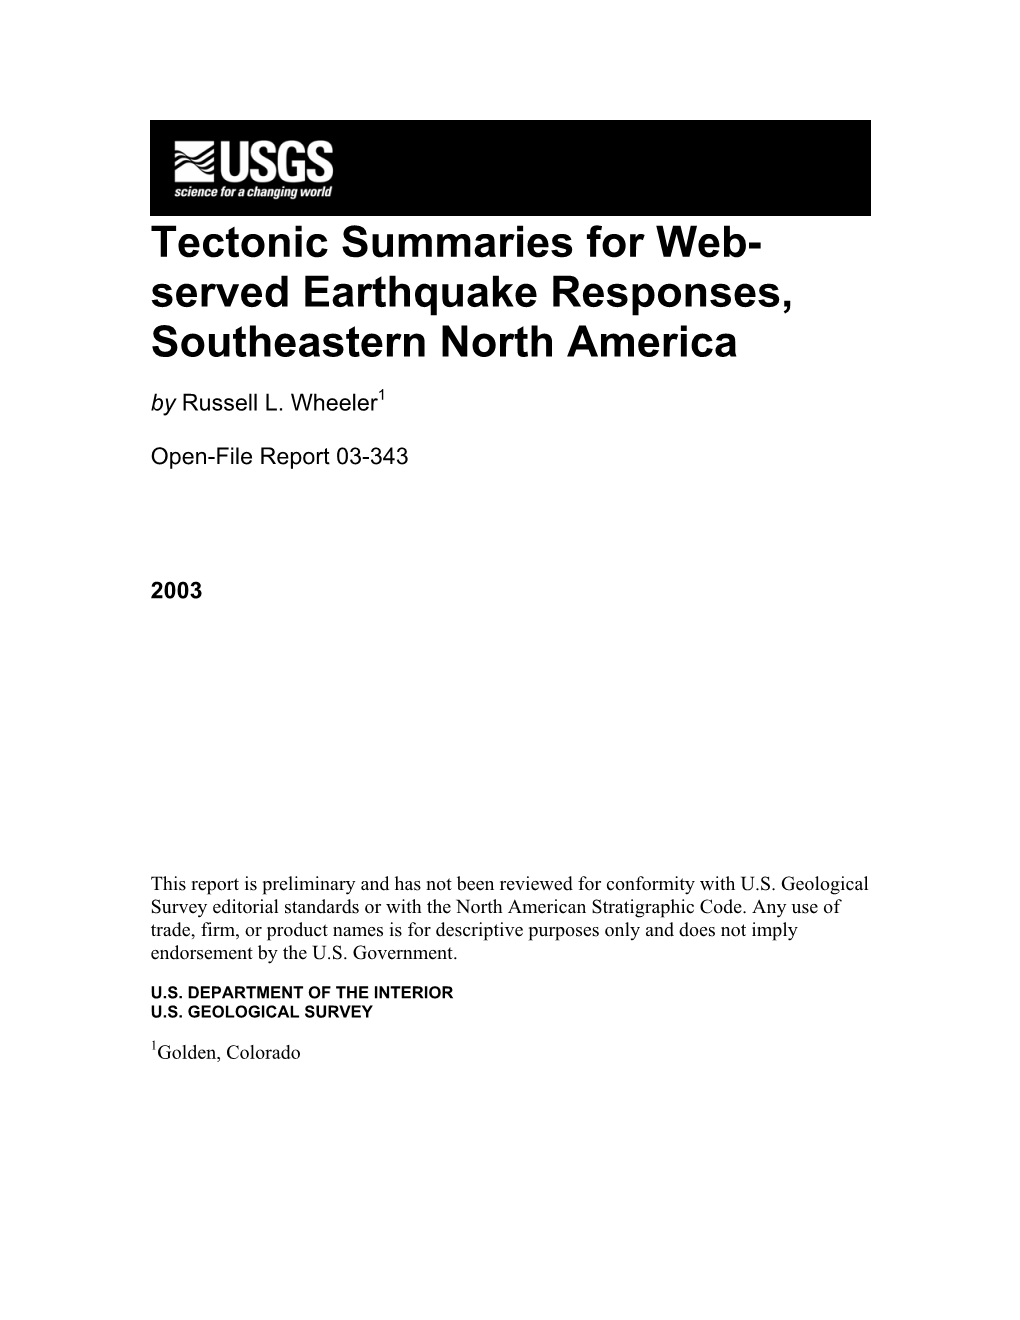 Tectonic Summaries for Web- Served Earthquake Responses, Southeastern North America